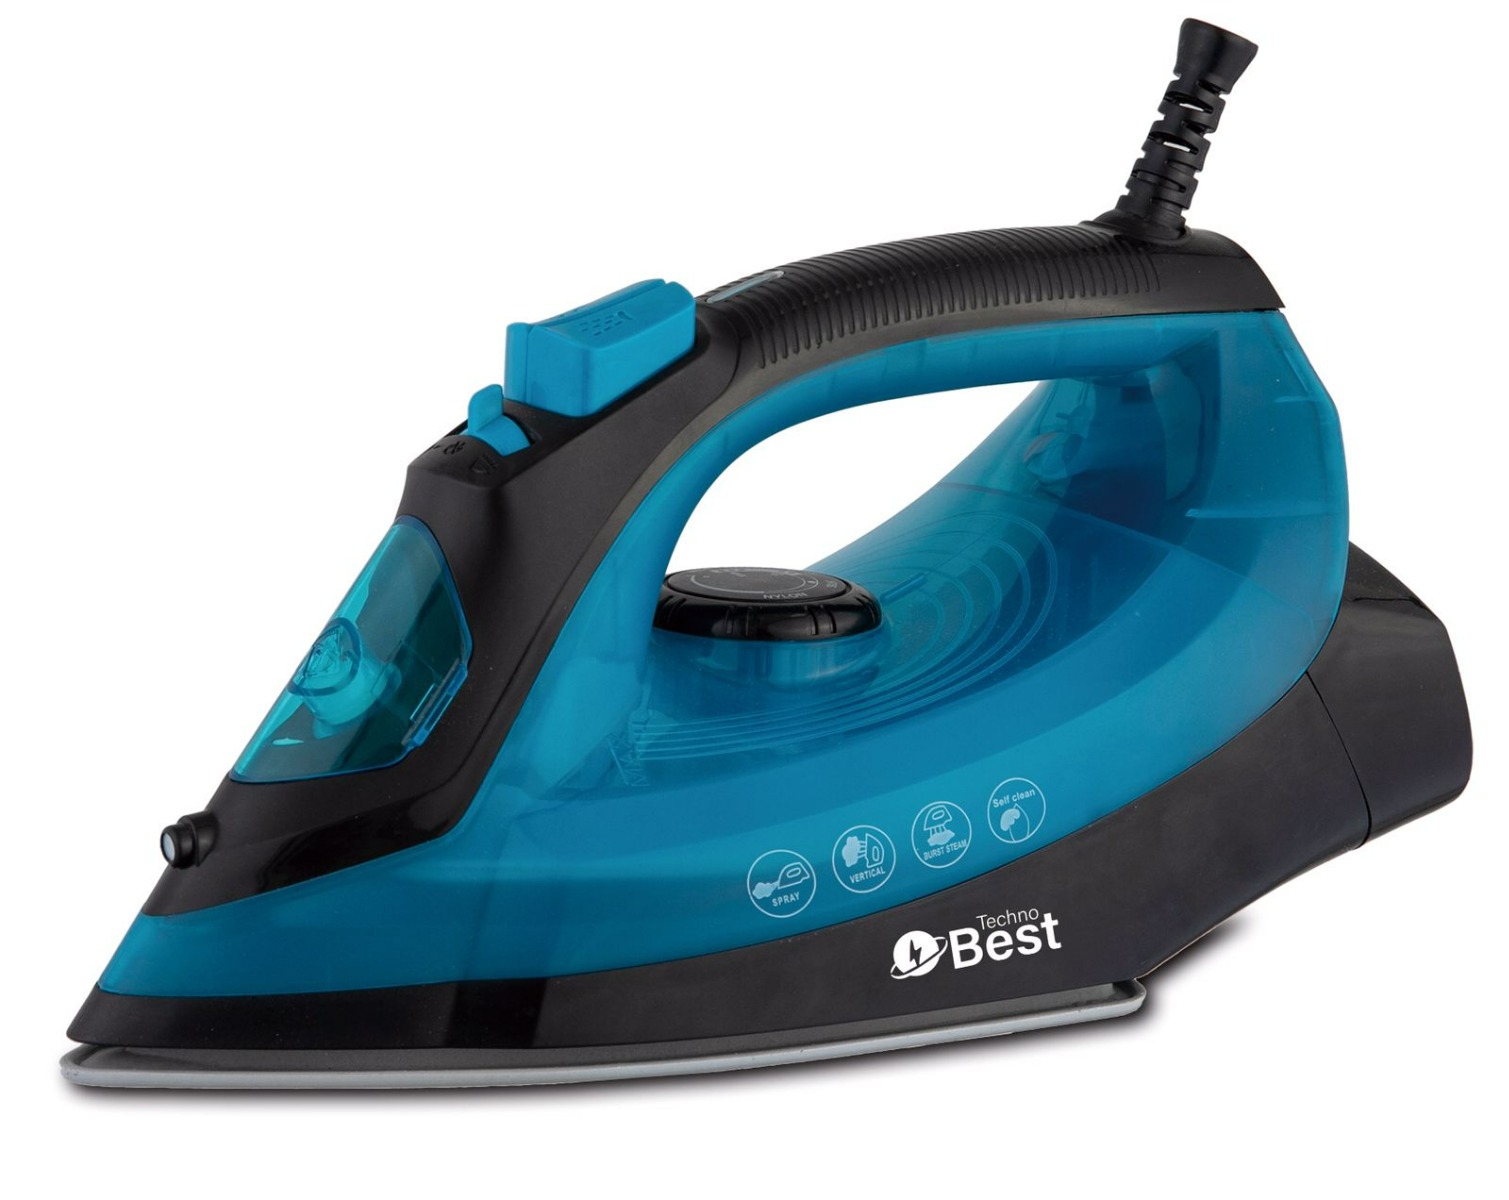 BEST STEAM IRON1800To2200, Dry, steam, spray ironing function, Self-Cleaning - BSI-002